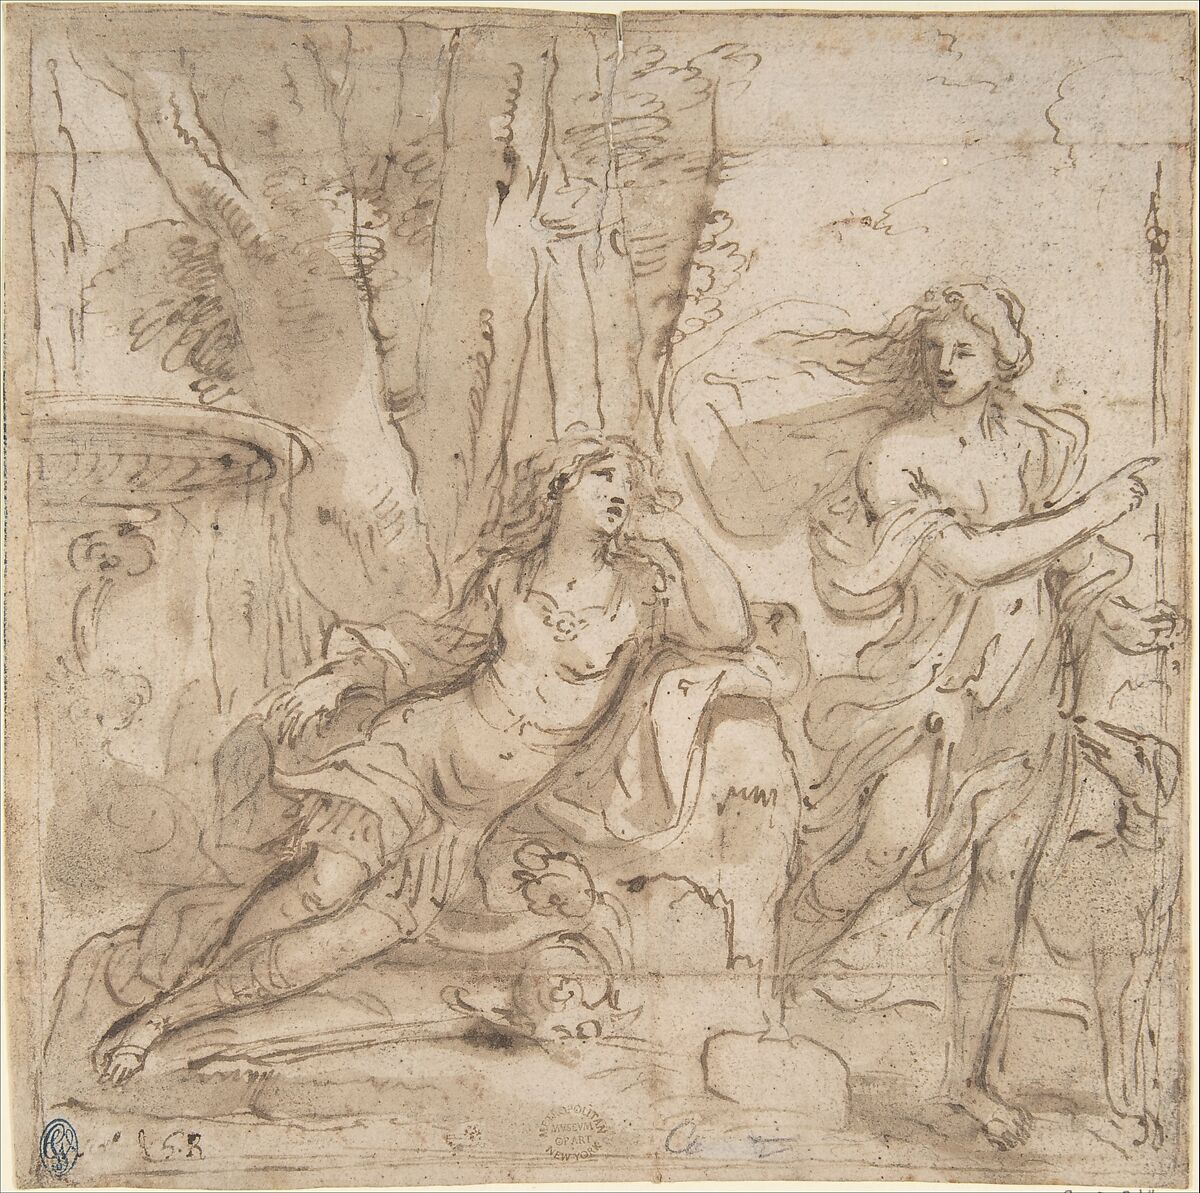 Venus and Adonis, Anonymous, Italian, Roman-Bolognese, 17th century, Pen and brown ink, brush and brown wash, over black chalk on light tan paper. Framing outline in brown ink. Trace of blue ink framing outline along left edge 